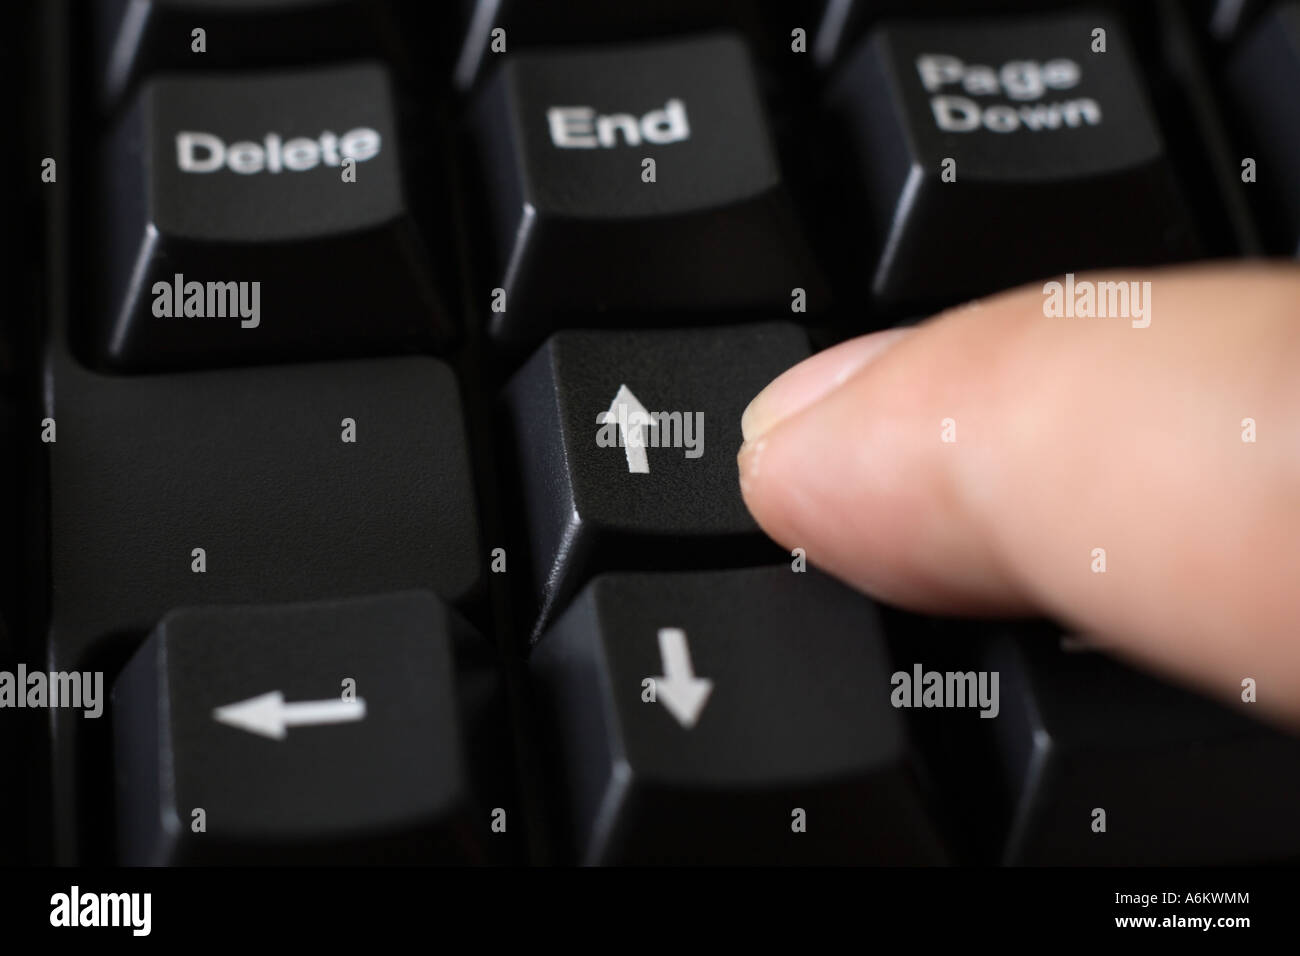 finger pressing up arrow button on black keyboard Stock Photo - Alamy